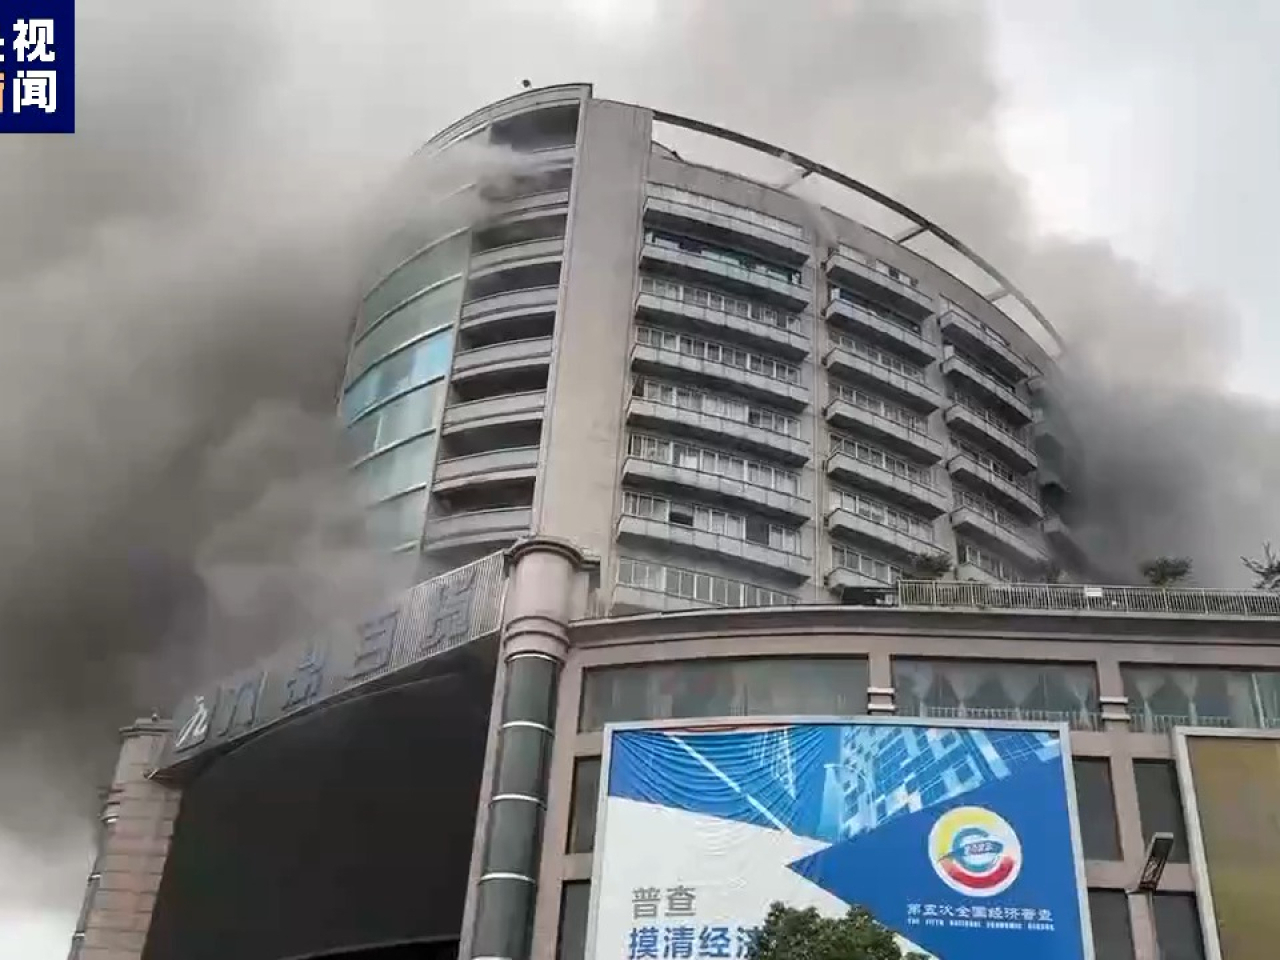 Death toll climbs to 16 in China shopping mall fire